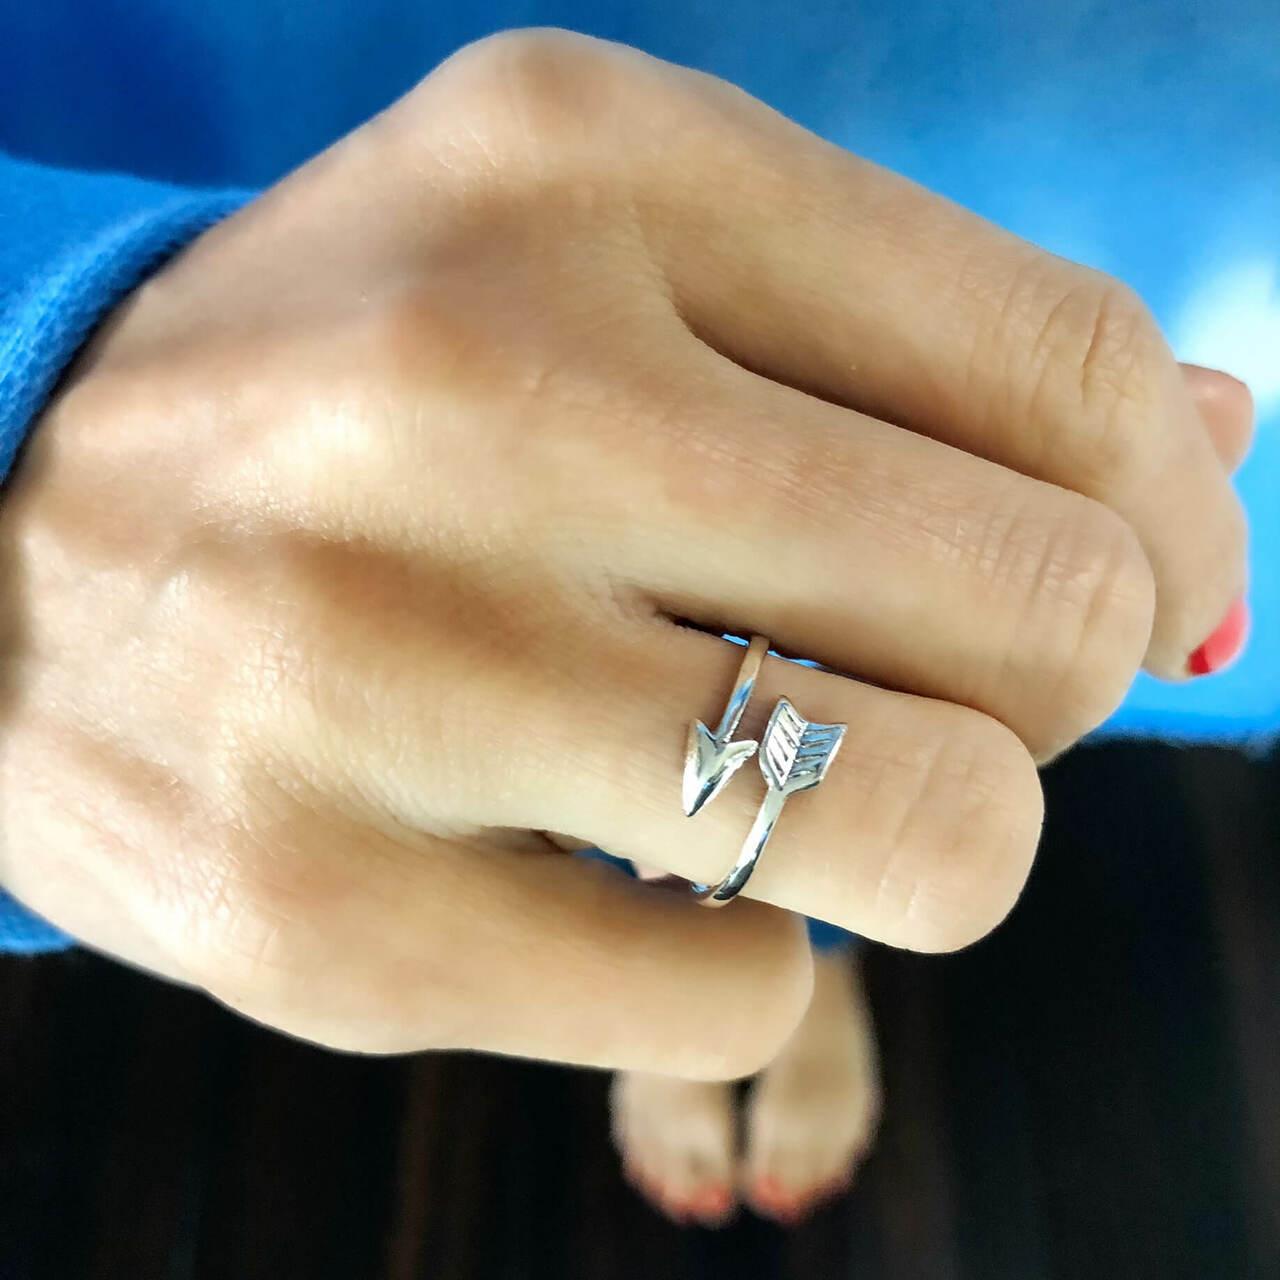 Lit'l Arrows Ring in handcrafted sterling silver